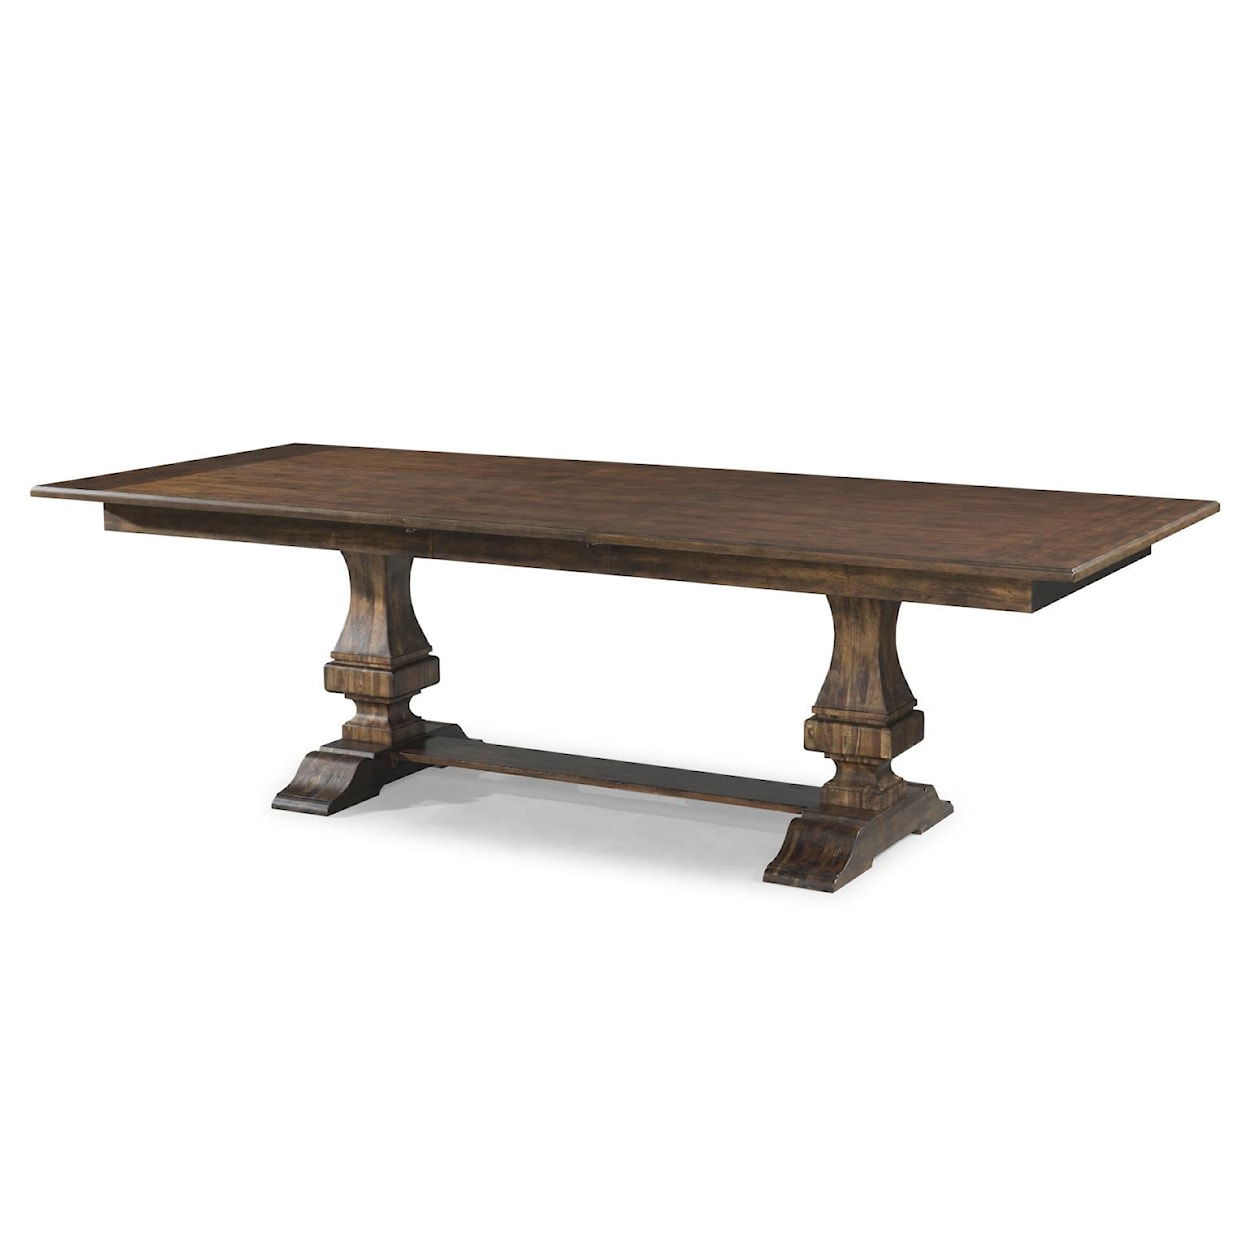 Trisha Yearwood Home Collection by Legacy Classic Trisha Yearwood Home Trestle Table